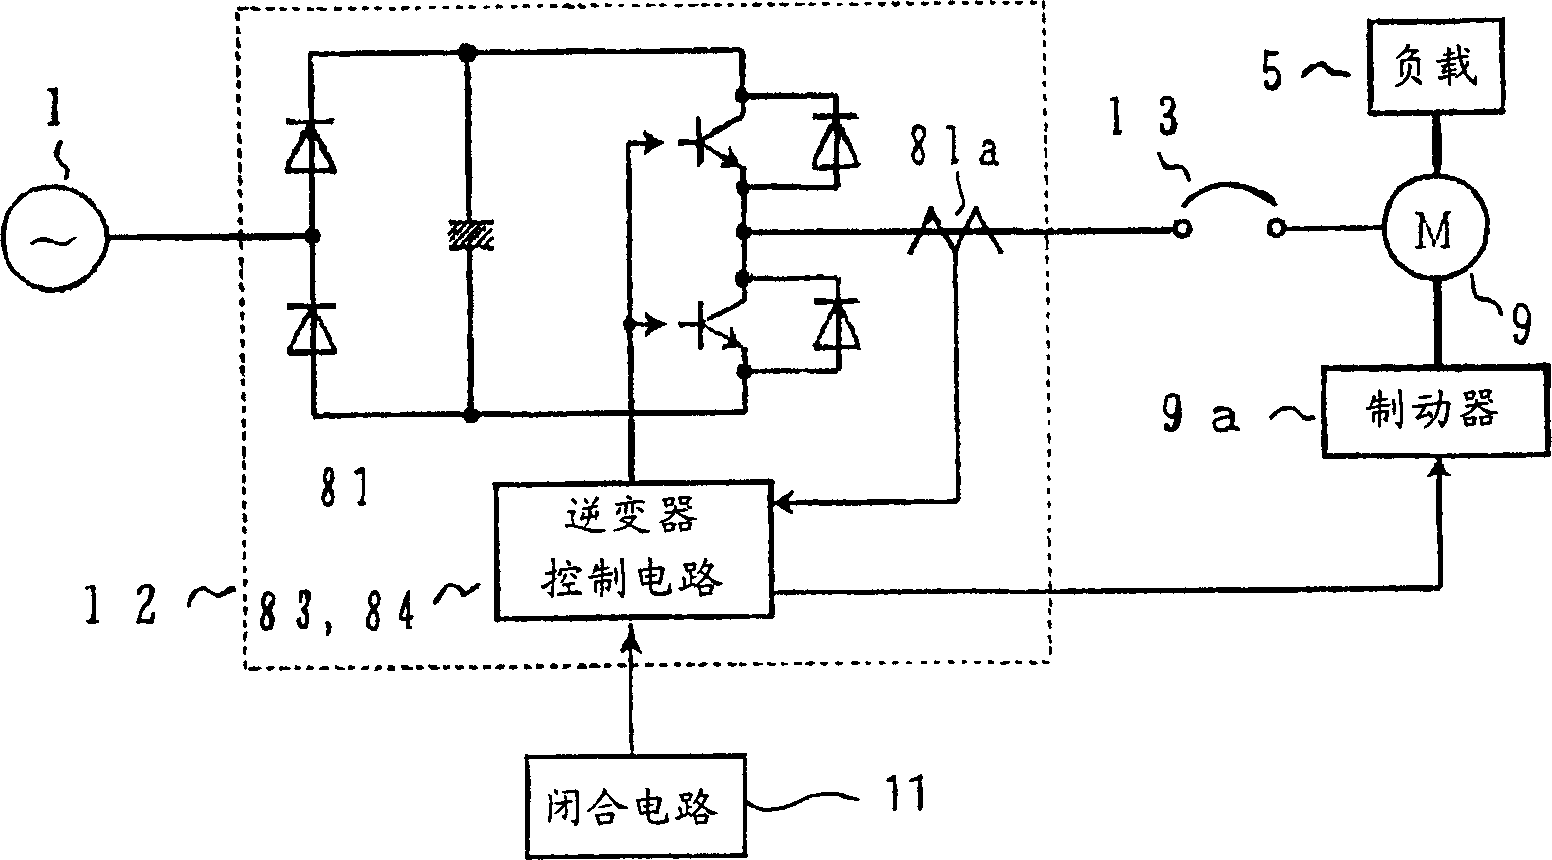 Control method of induction motor